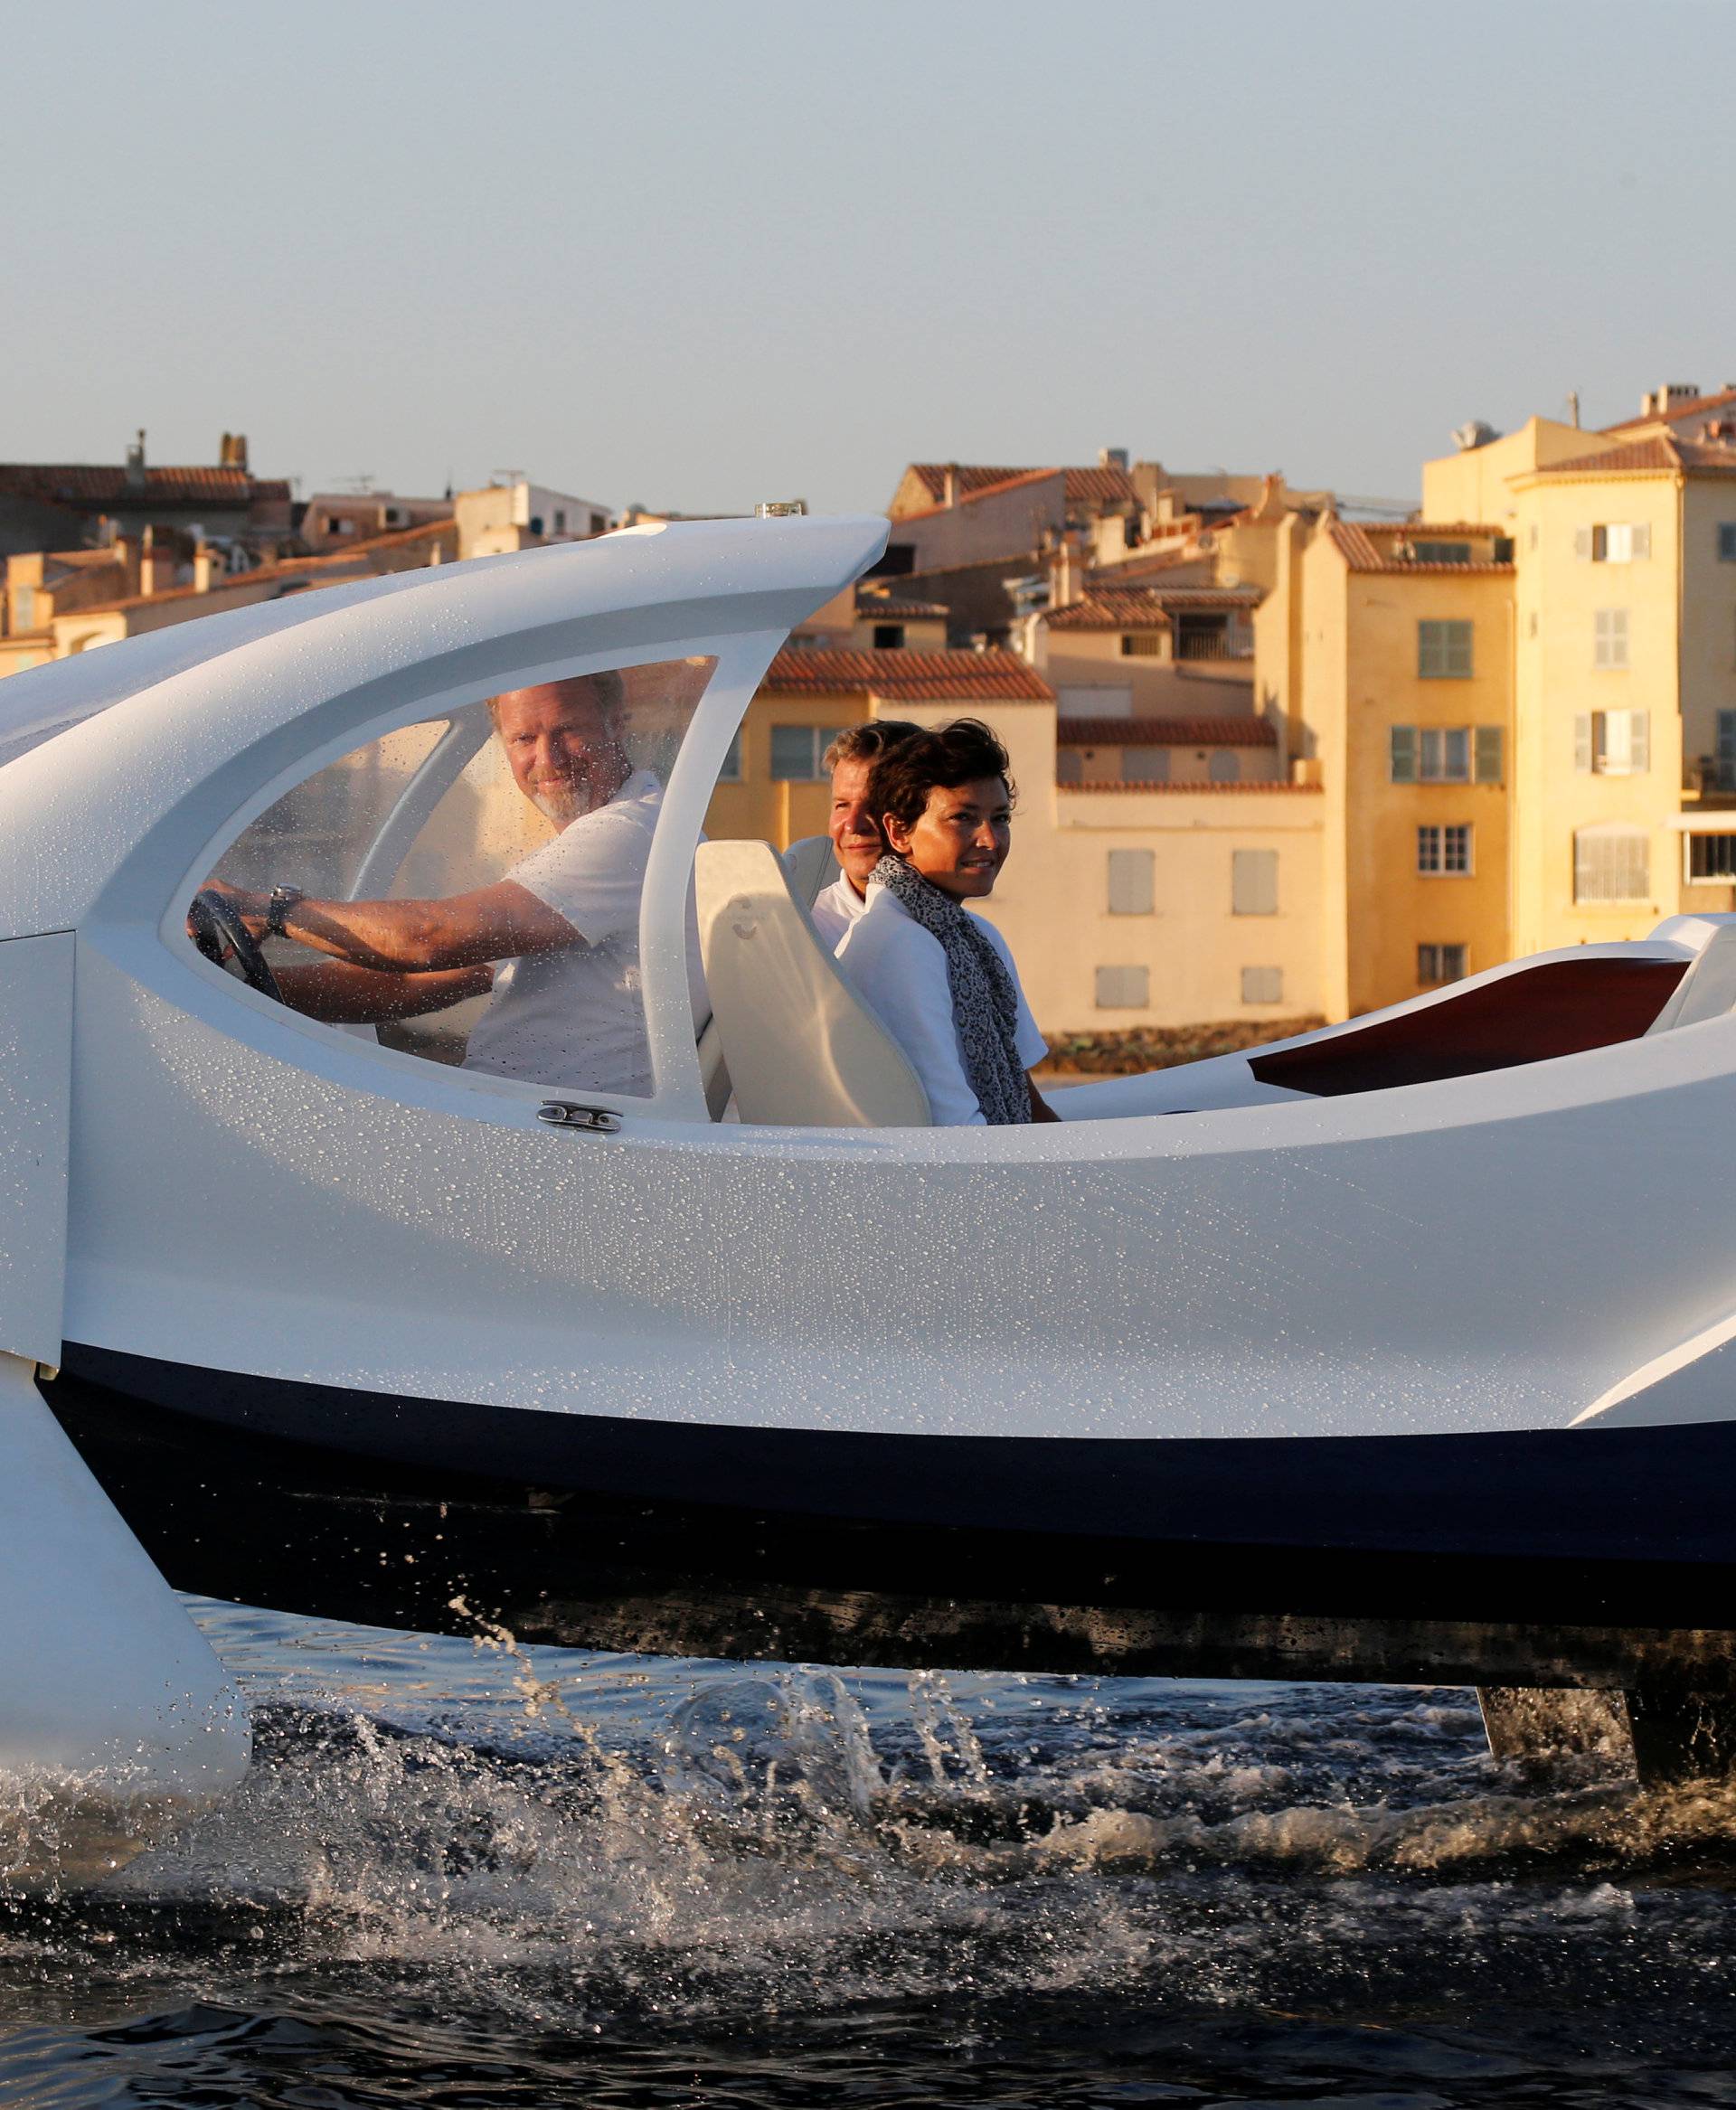 SeaBubbles executives are seen aboard prototype of their water taxi in the harbour of Saint-Tropez